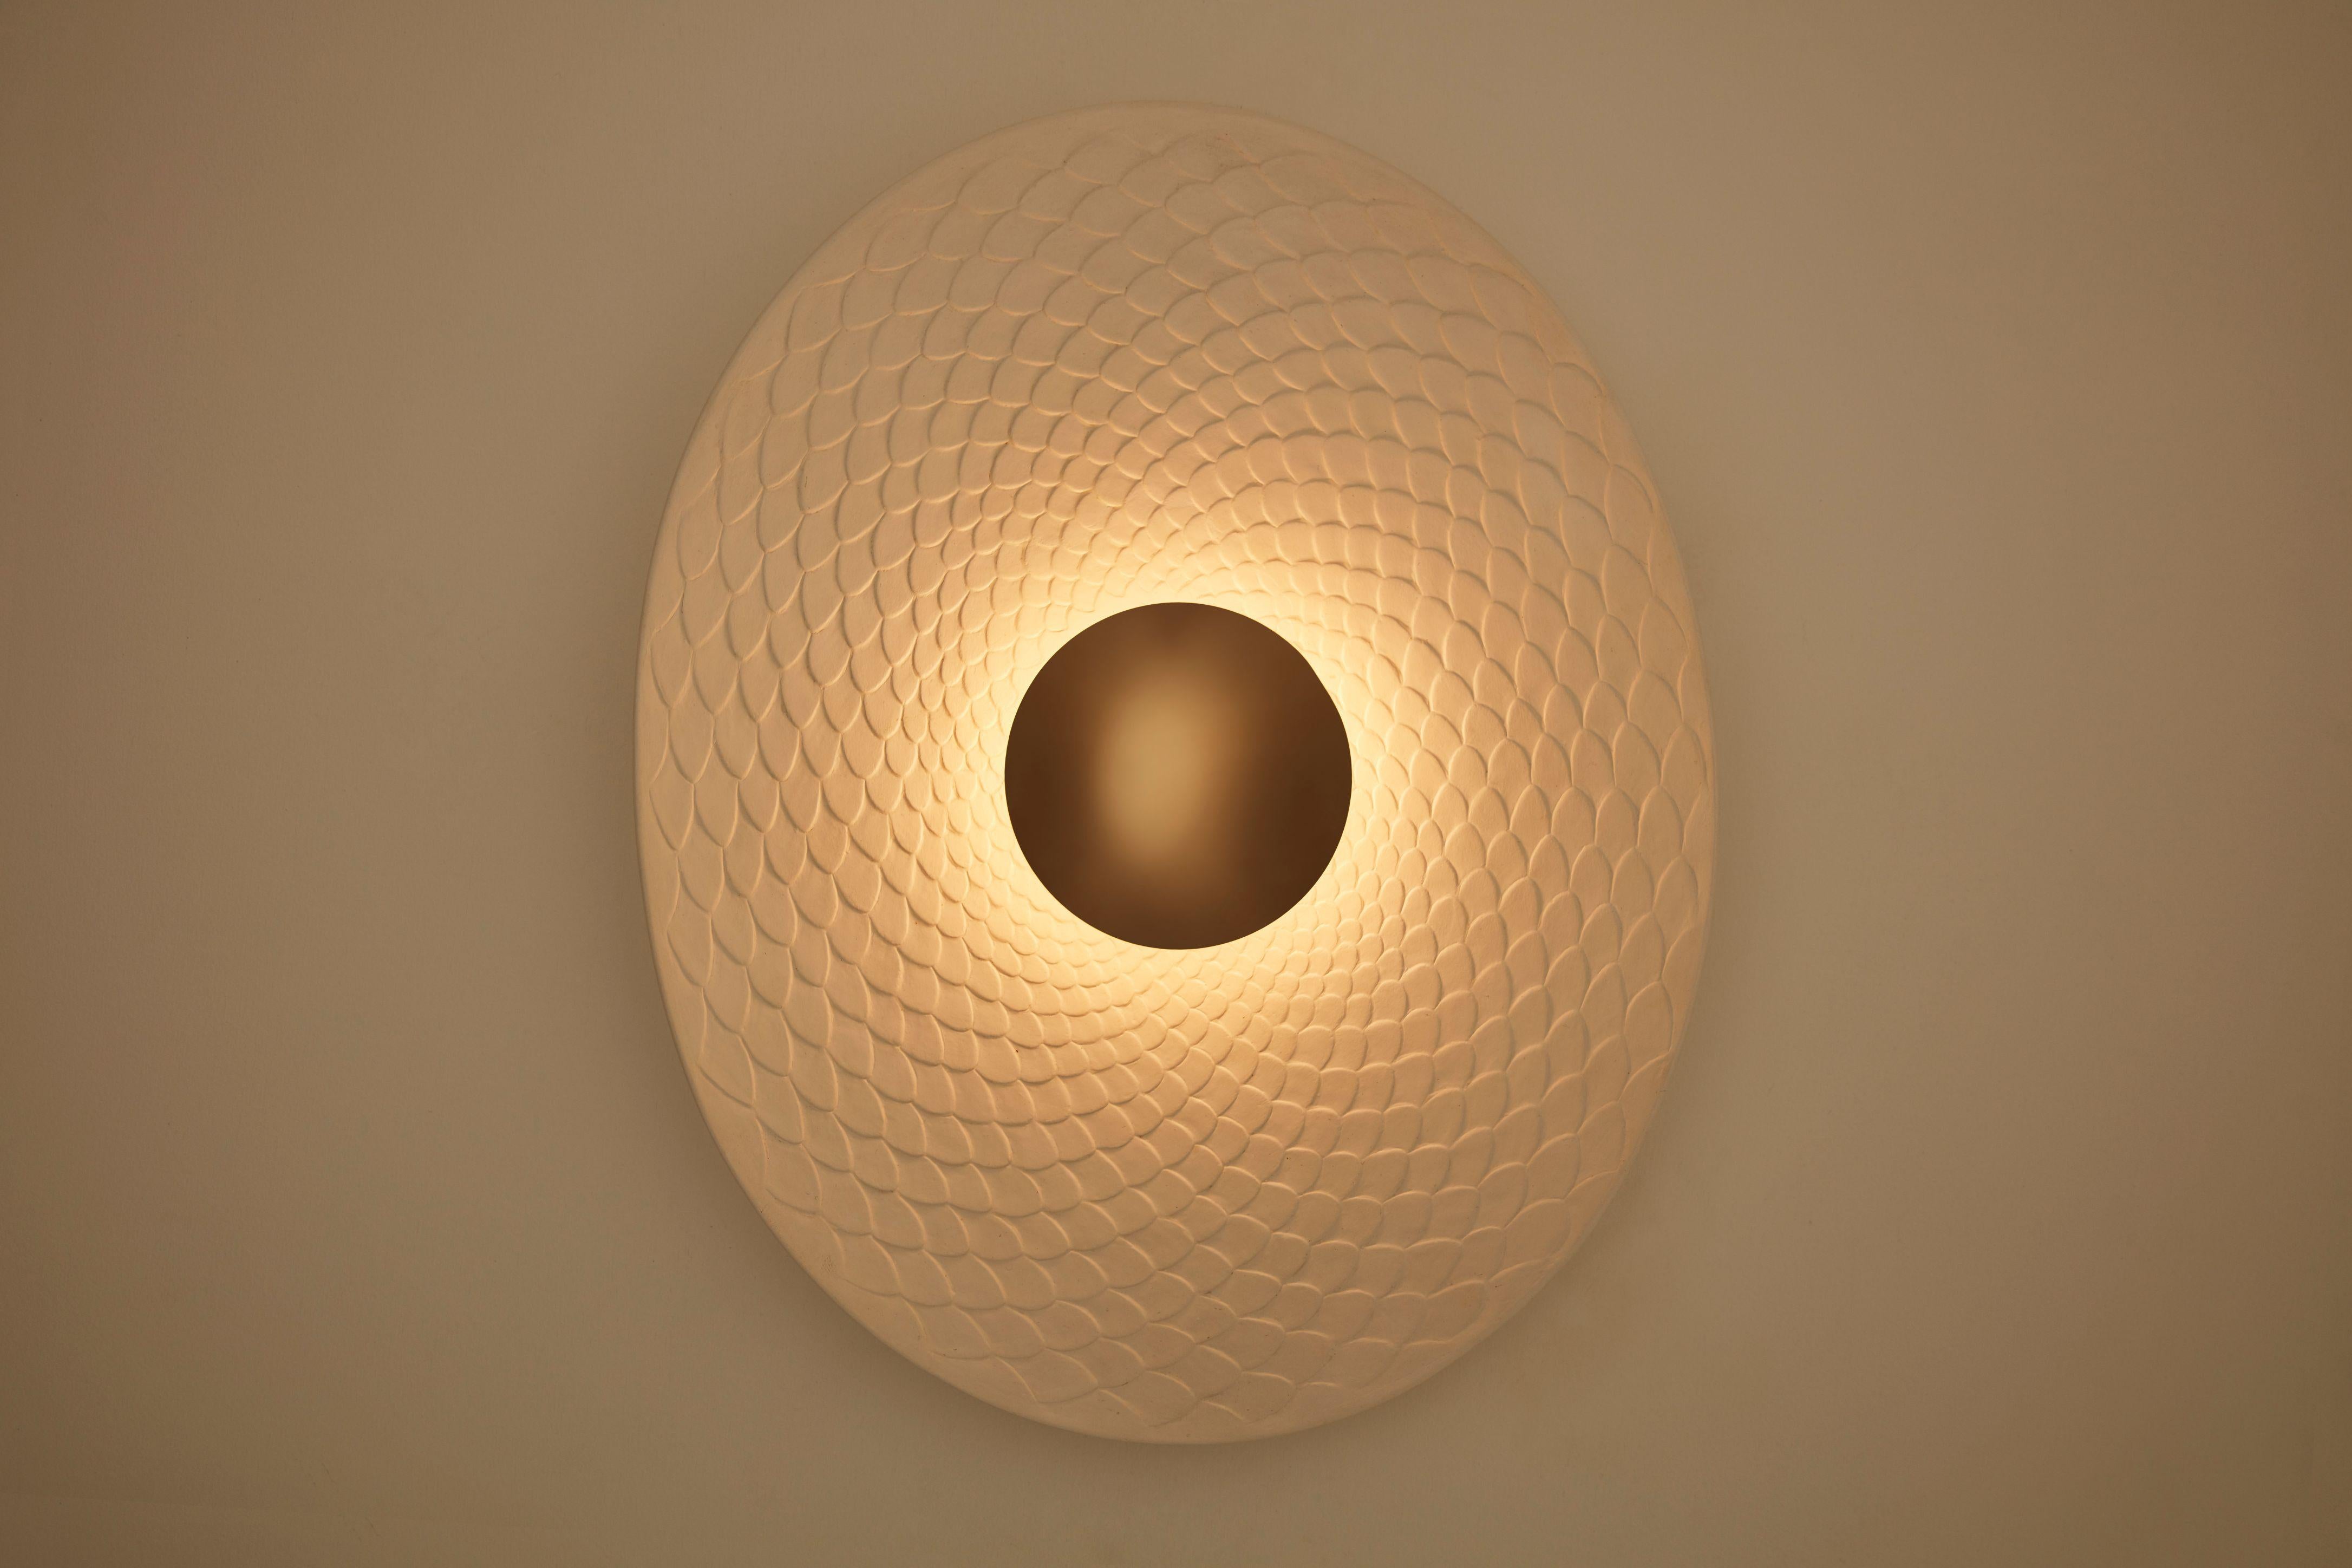 Chisaii Ryu wall lamp by Mydriaz
Dimensions: H 41.5 x W 31.8 x D 7.7 cm
Materials: Brass, plaster
Finishes: Golden-plated polished brass, White nickel finish on polished brass, Black nickel finish on polished brass
3 kg

Light source: 24V LED